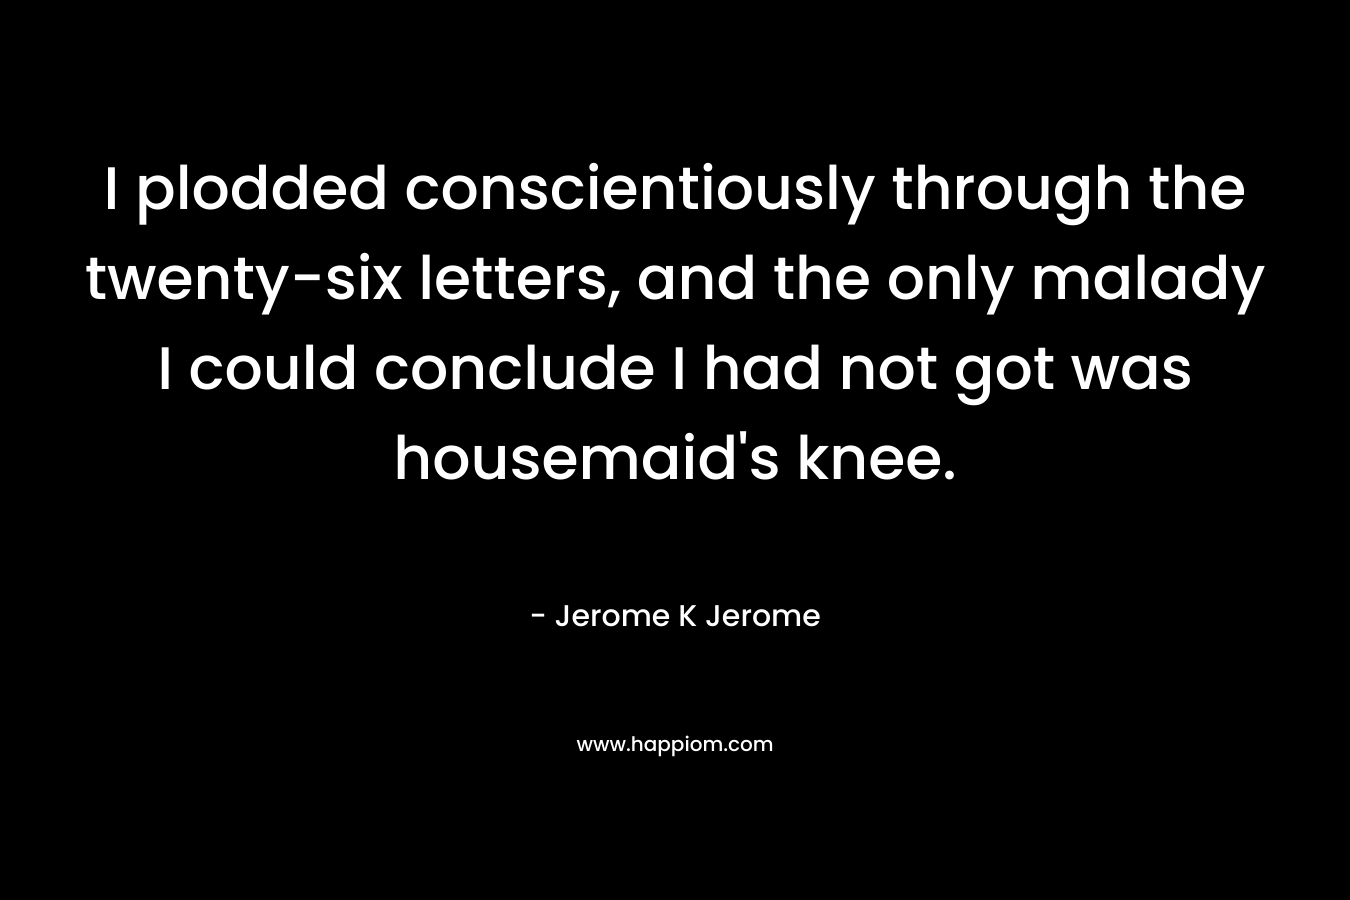 I plodded conscientiously through the twenty-six letters, and the only malady I could conclude I had not got was housemaid’s knee. – Jerome K Jerome